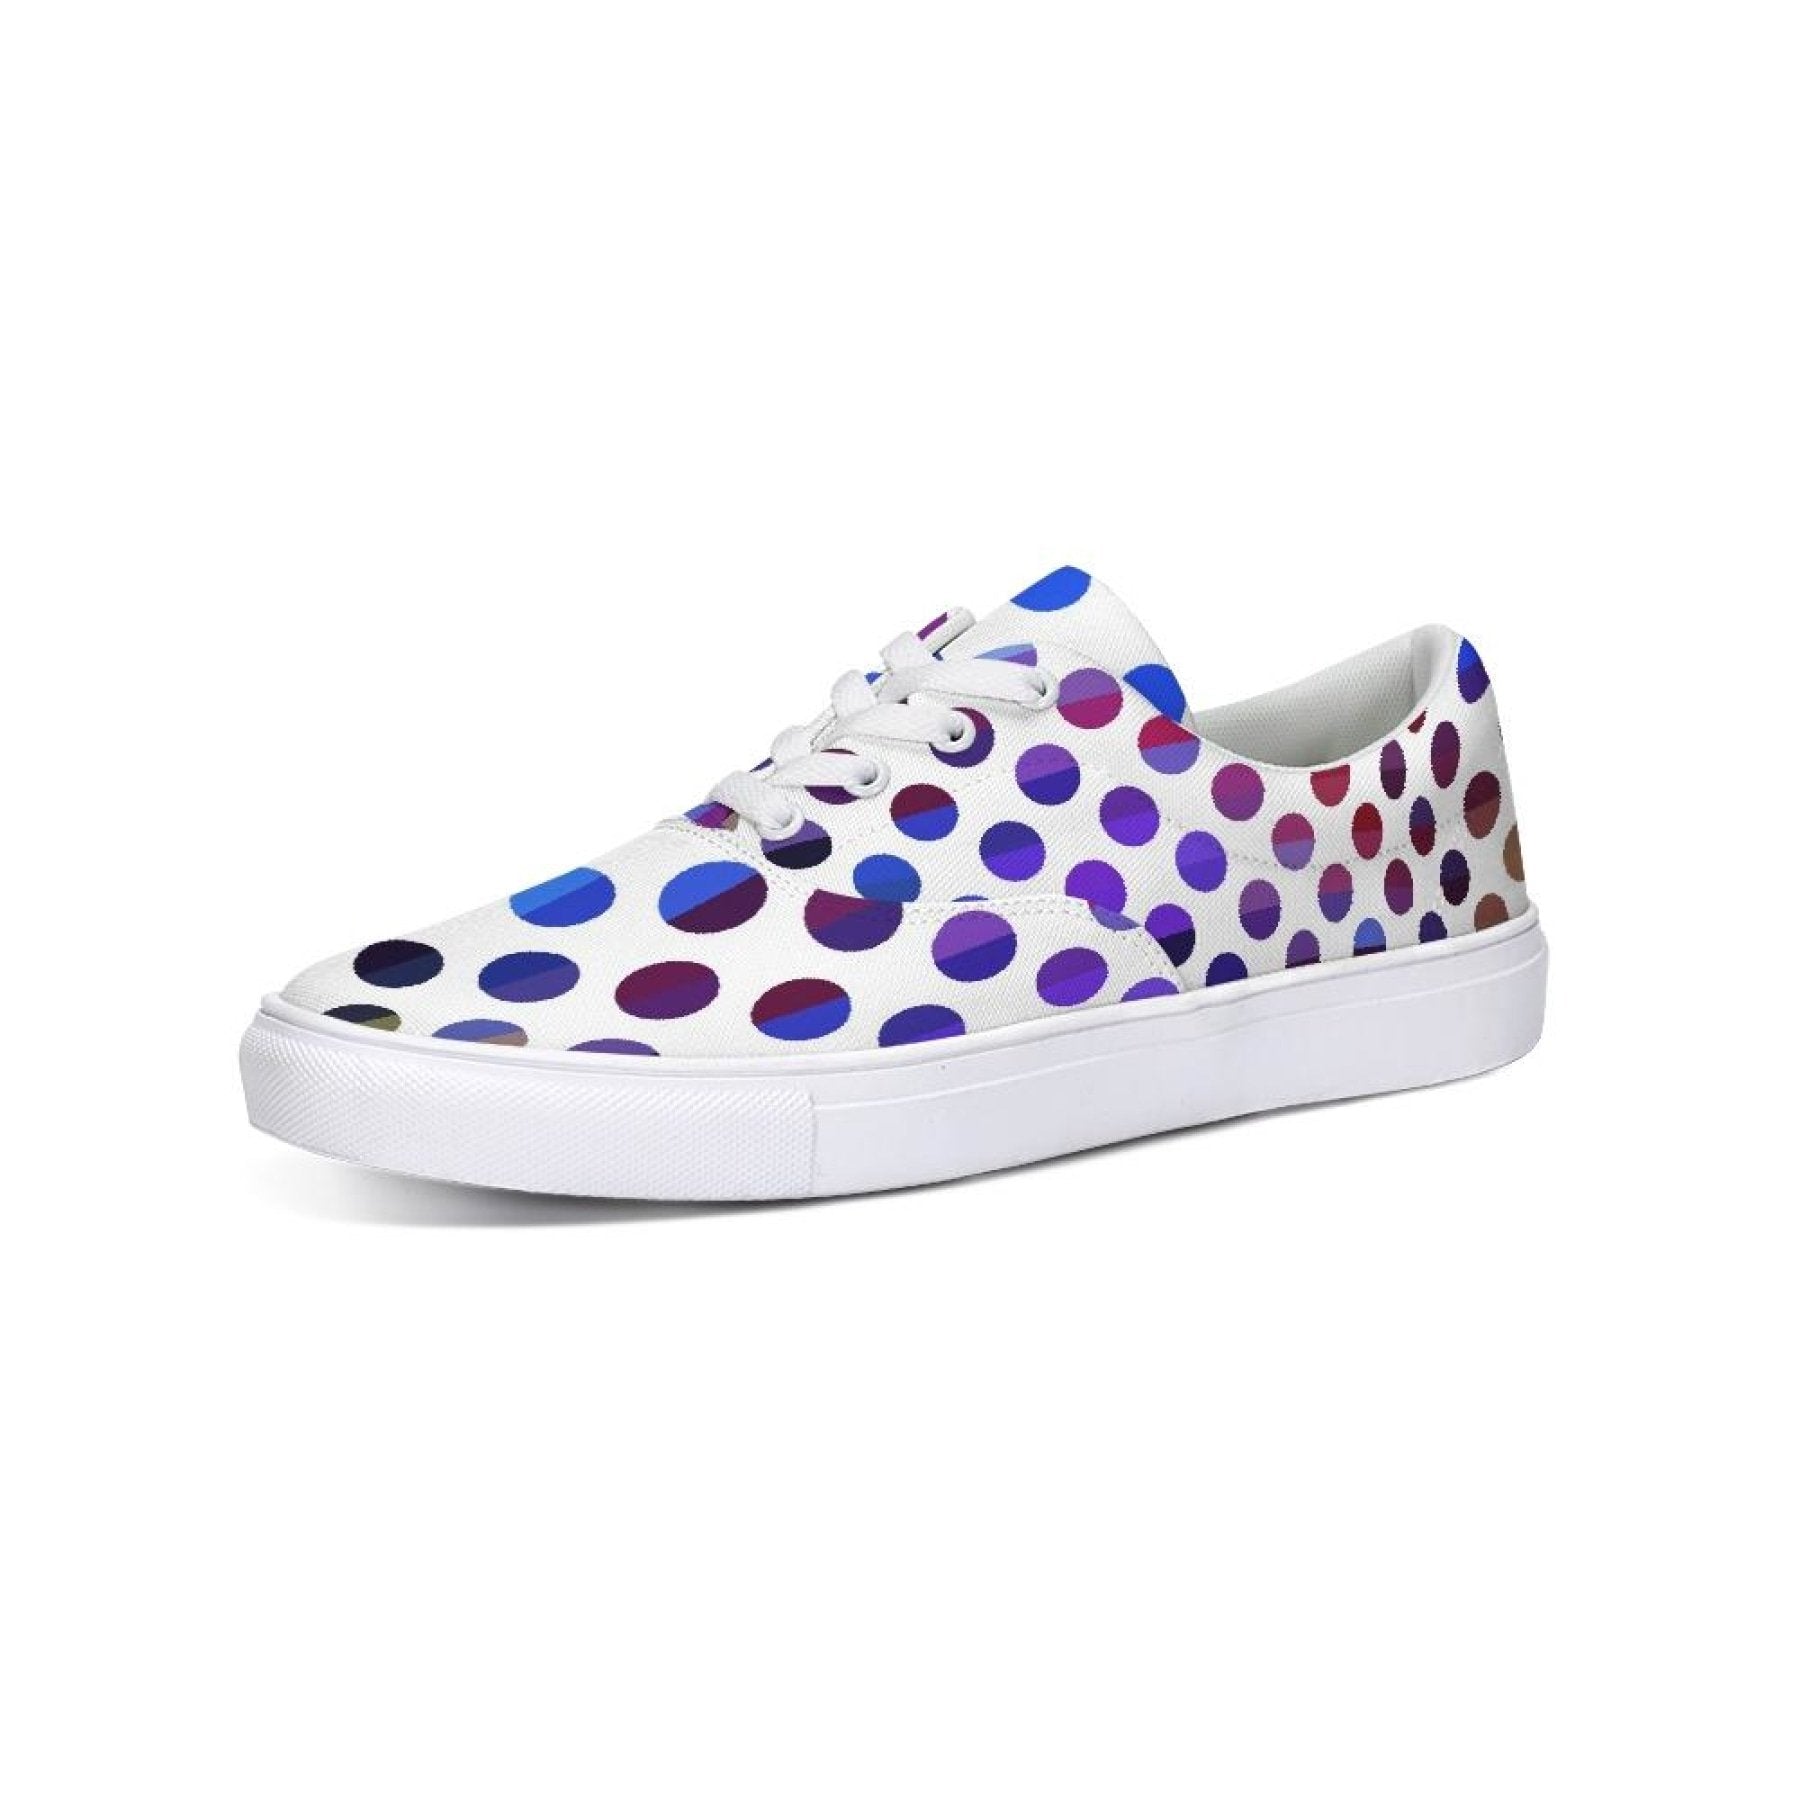 Uniquely You Womens Sneakers - Purple Polka Dot Canvas Sports Shoes